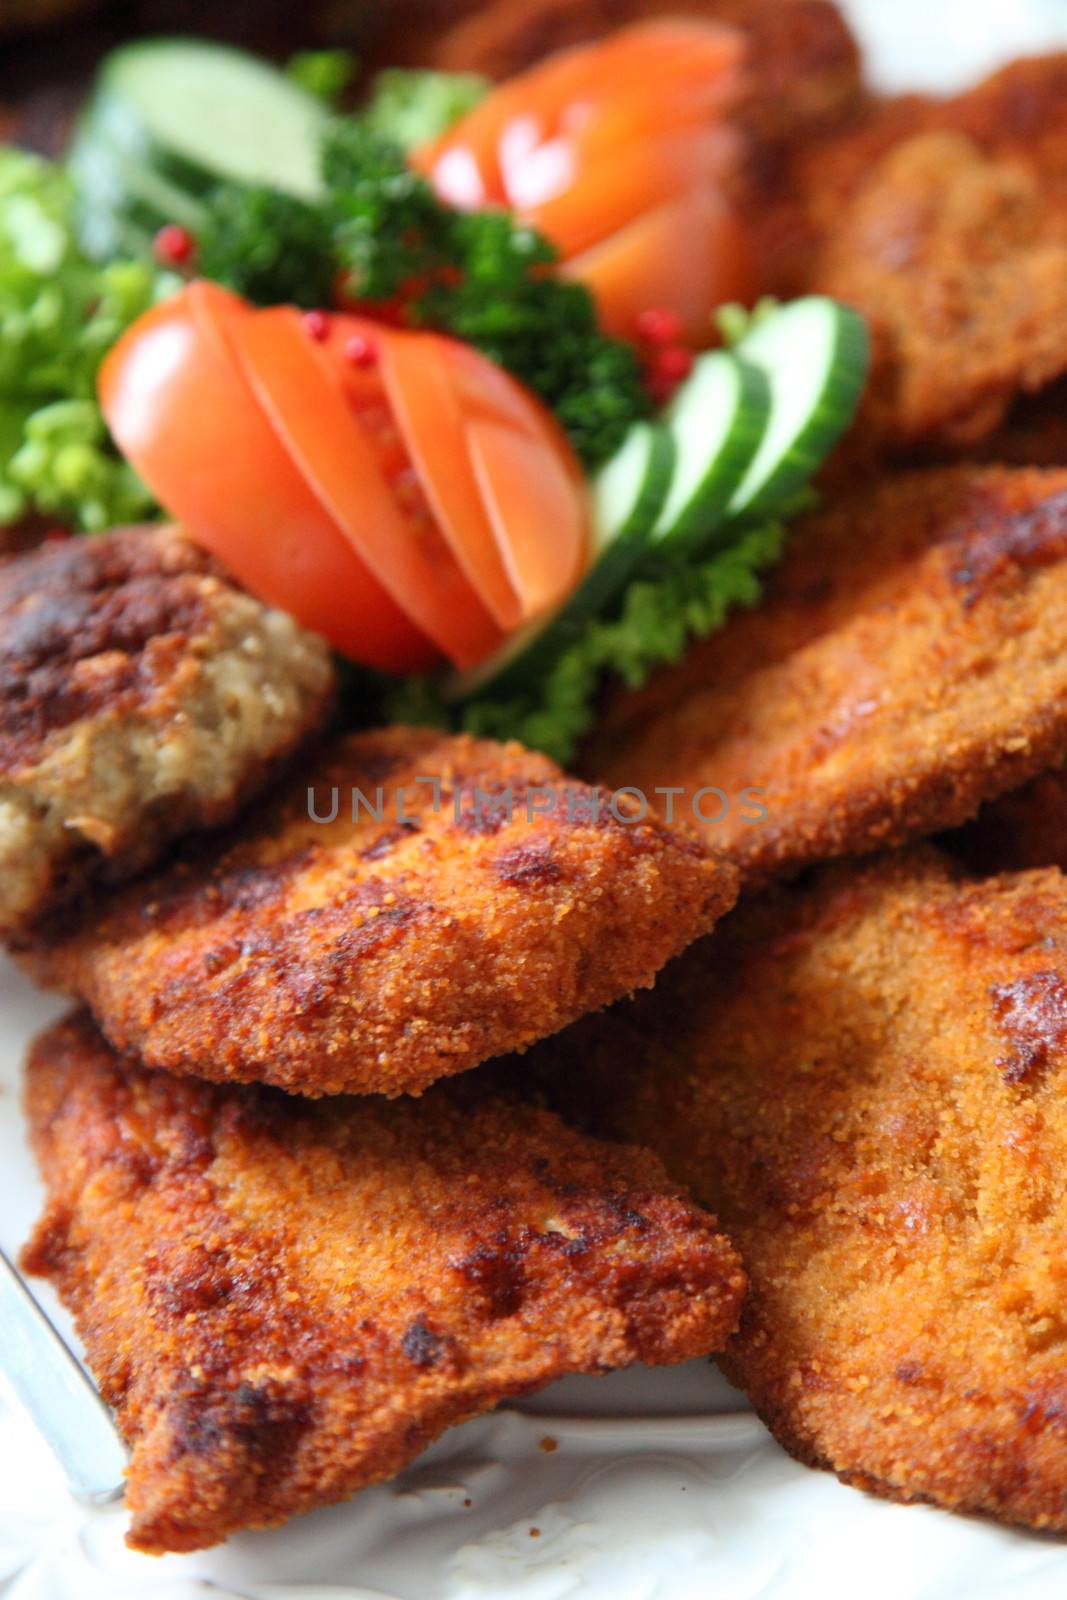 Crumbed meat on a buffet table by Farina6000